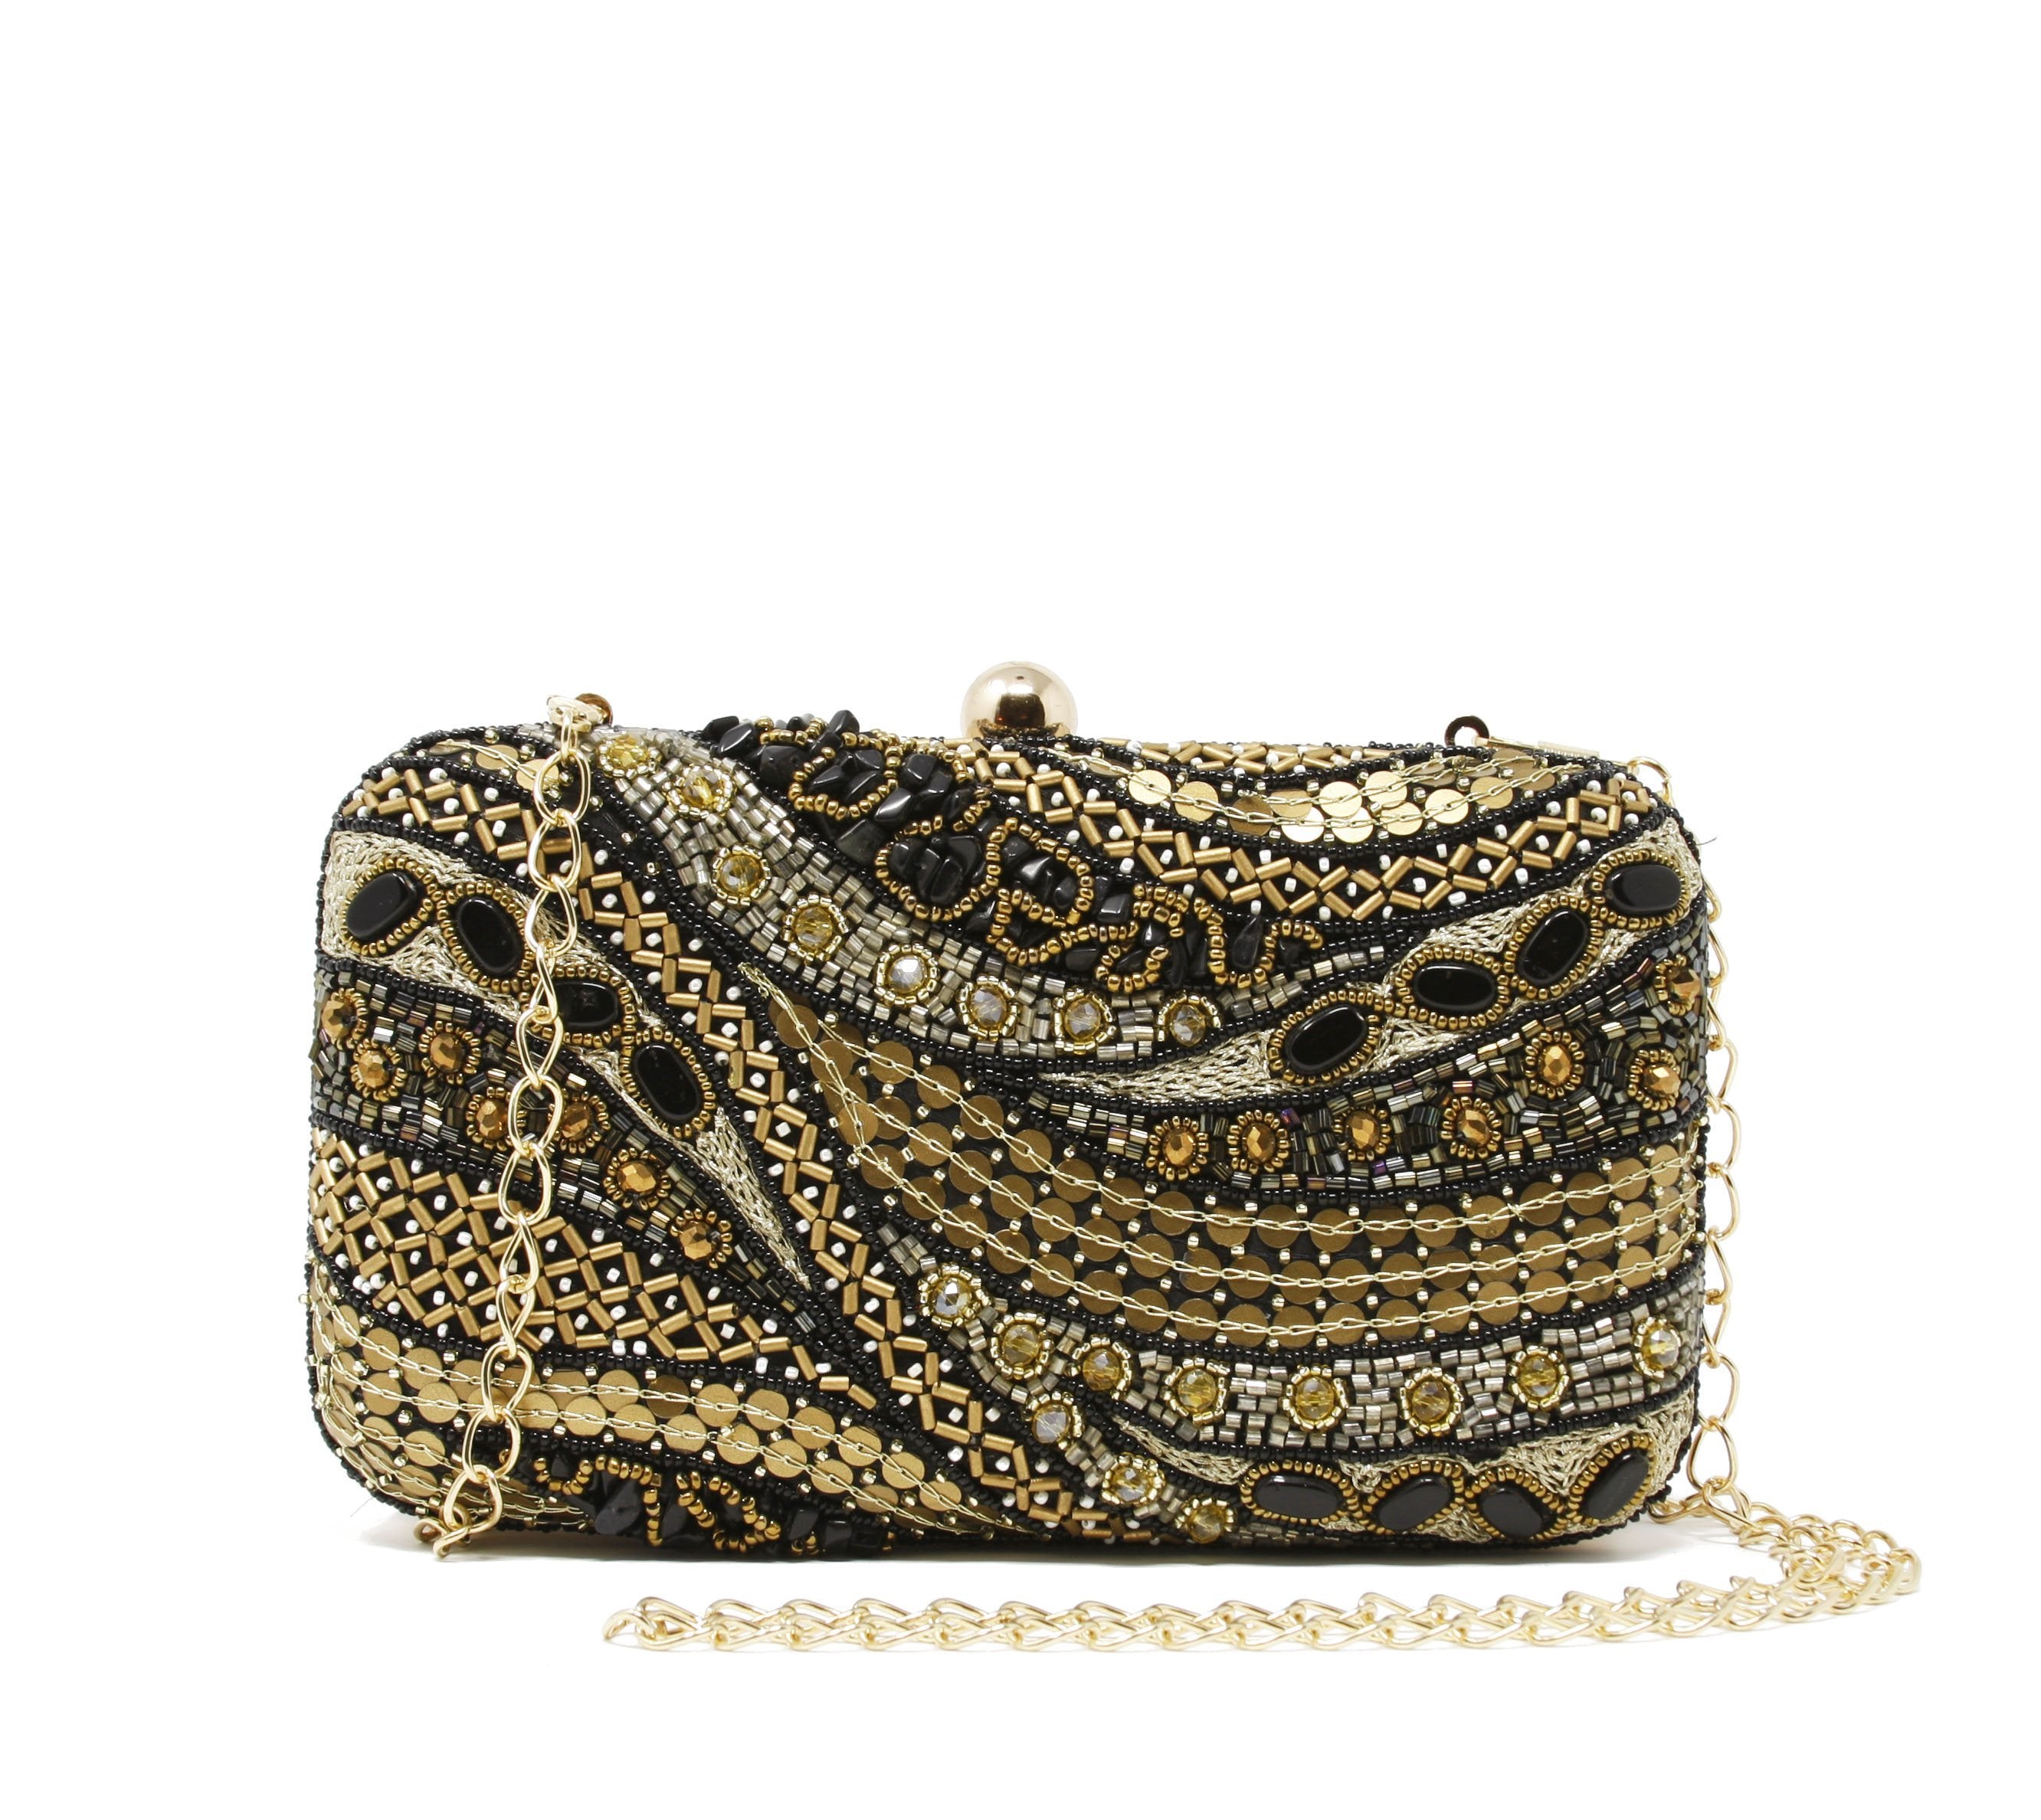 Gold chain strap with 23" drop for shoulder or crossbody wear. Heavy embroidery with beads & stones.